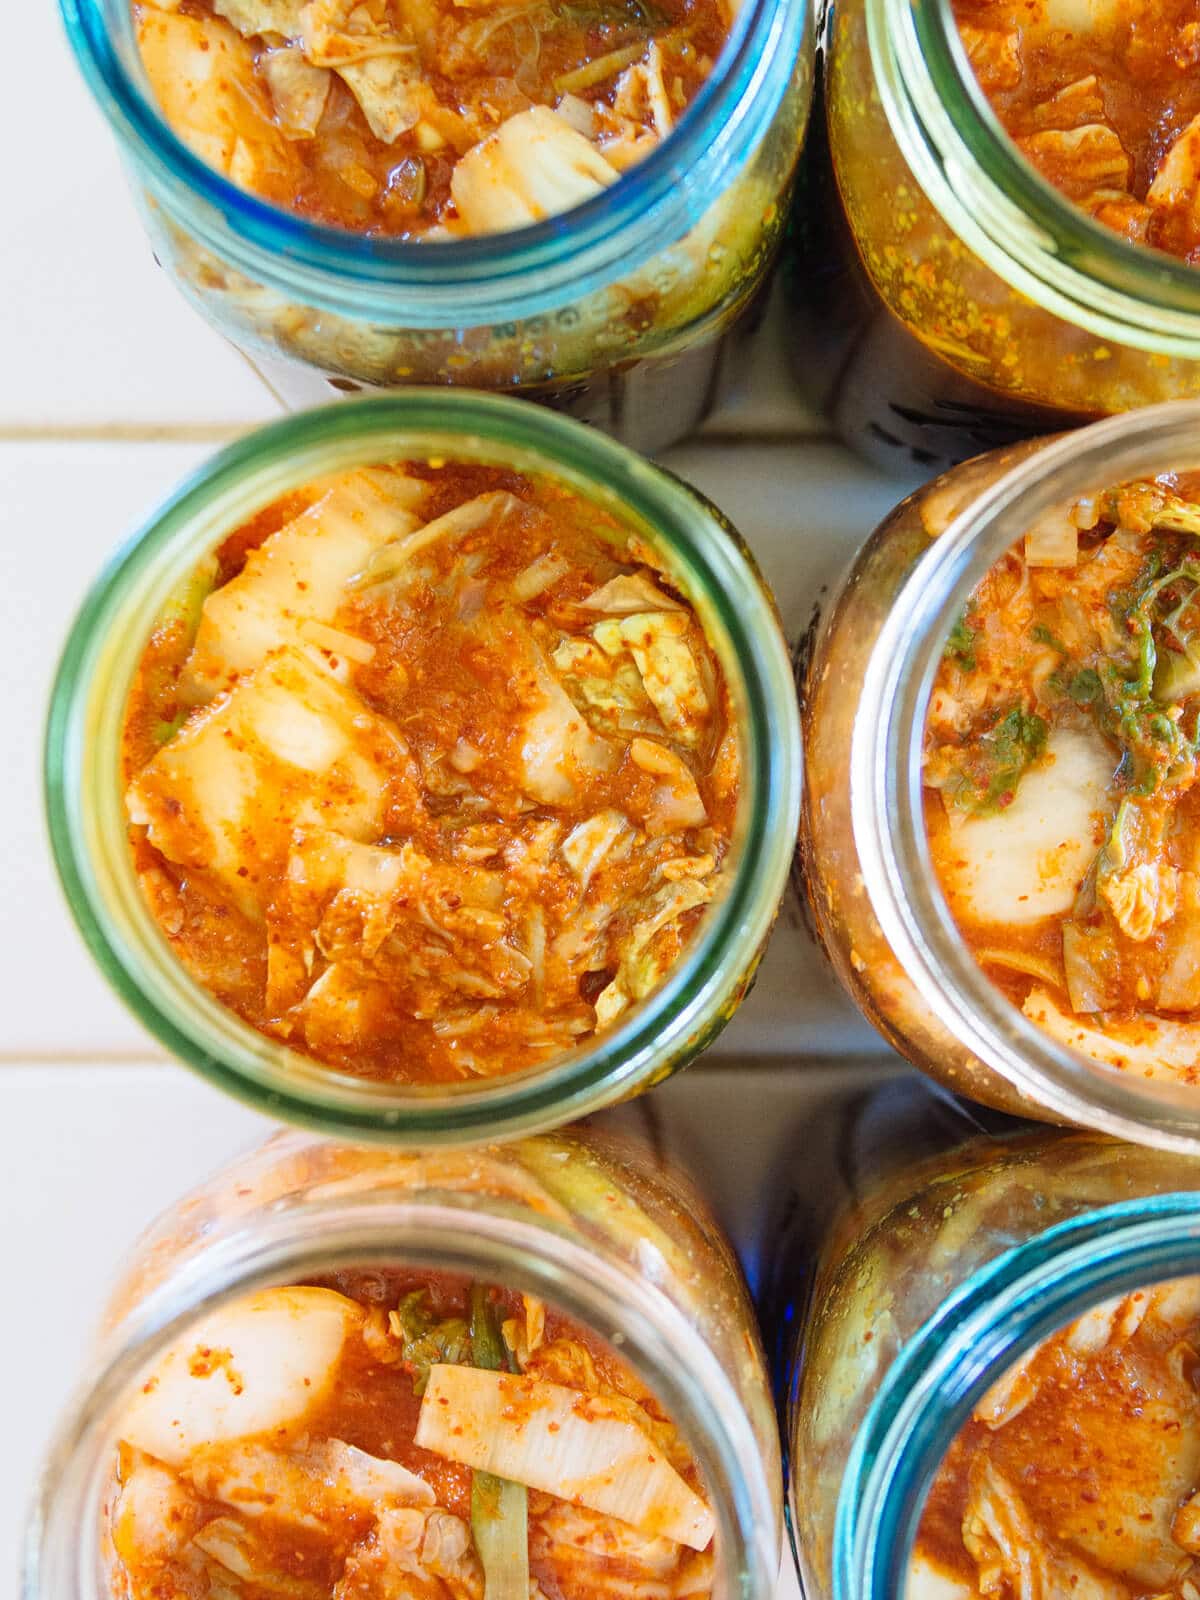 Freshly made kimchi should taste pleasantly sour with a deep umami layer